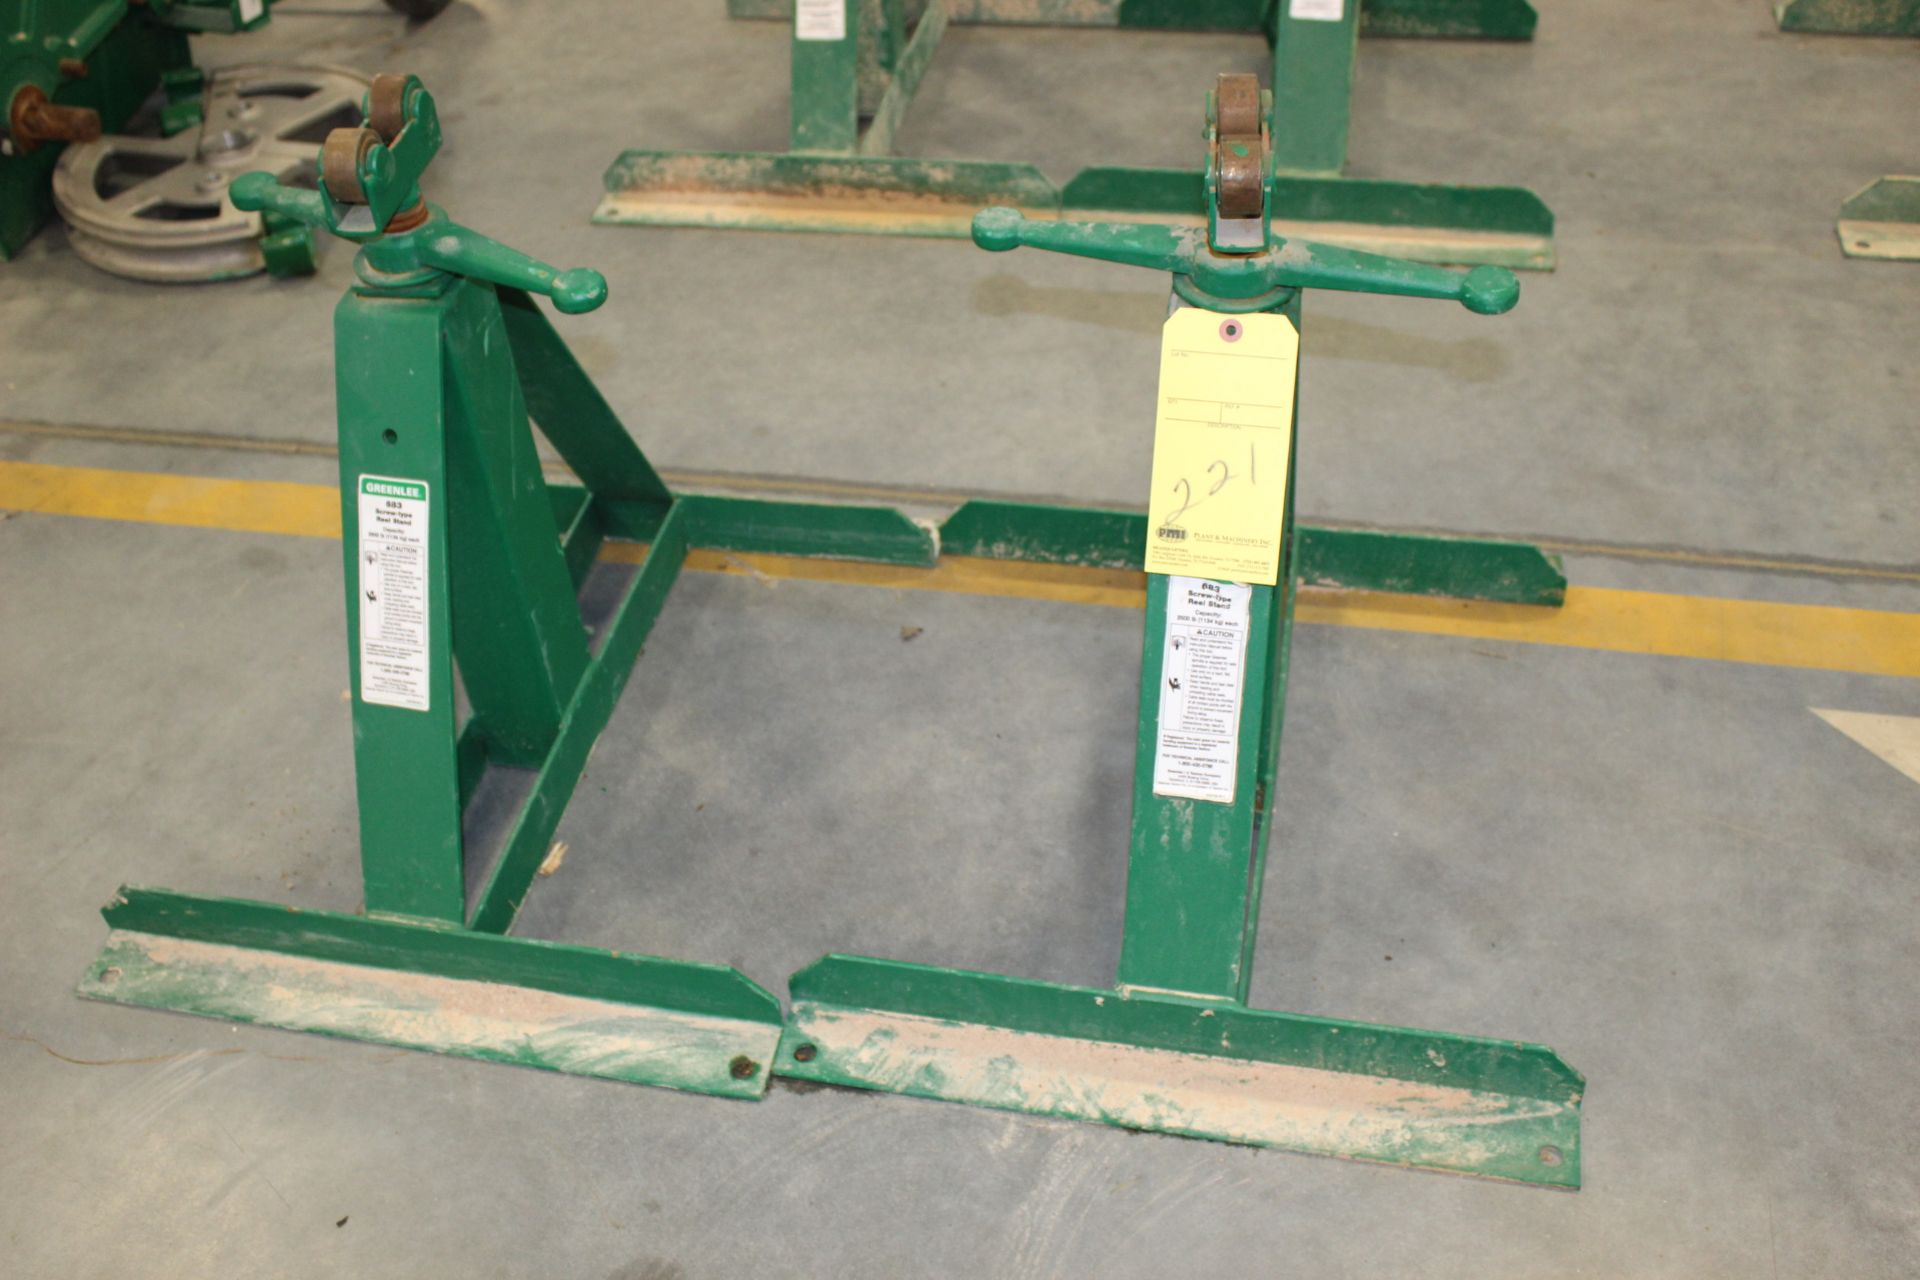 LOT OF SCREW TYPE REEL STANDS, GREENLEE MDL. 683 (one set)